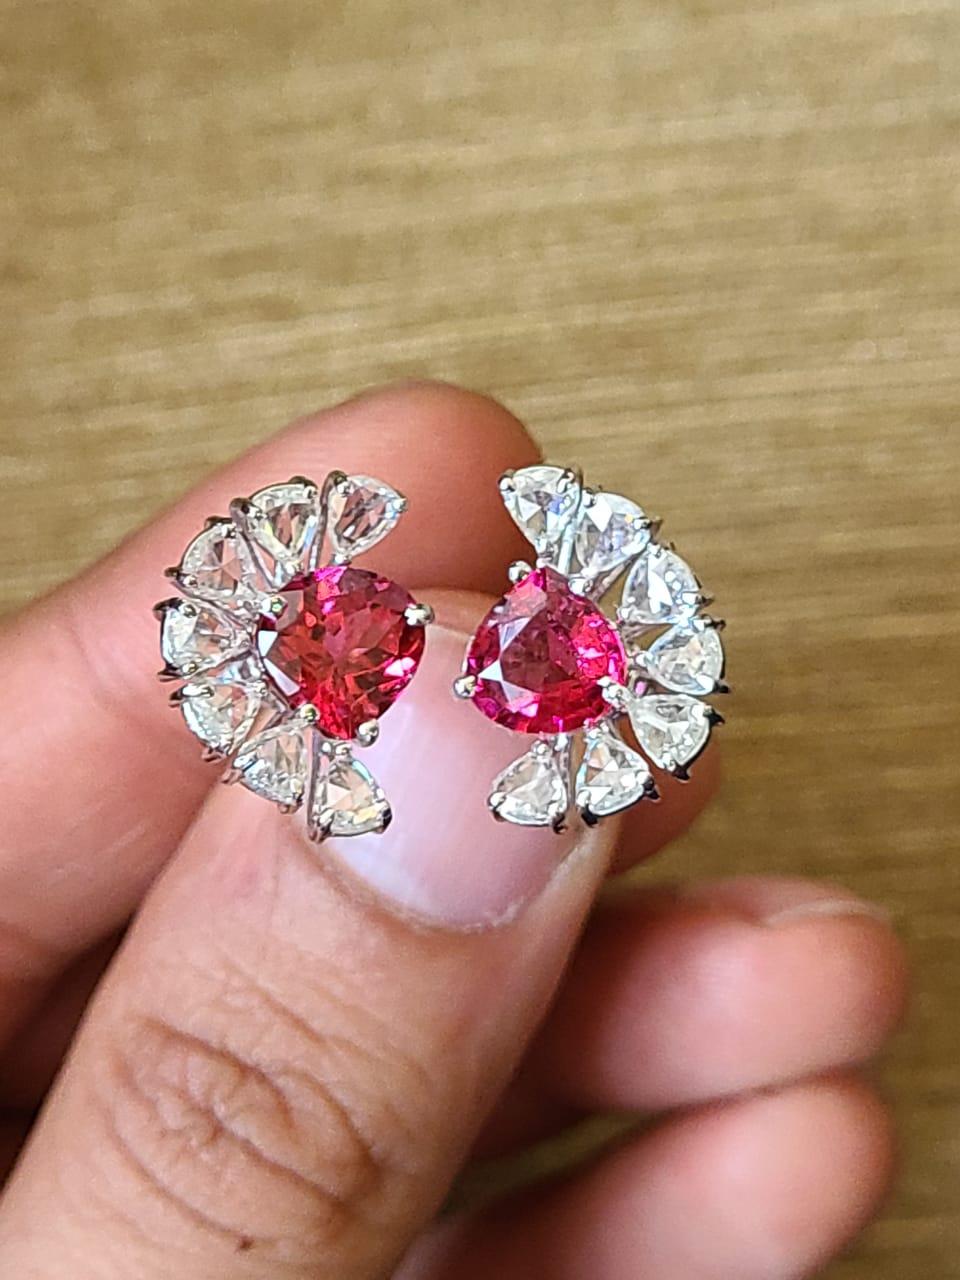 A very gorgeous and beautiful Rubellite Cocktail/ Engagement Ring set in 18K Gold & Diamonds. The combined weight of the Rubellite is 3.02 carats. The weight of the Rose Cut Diamonds is 1.79 carats. Net Gold weight is 6.00 grams. The dimensions of